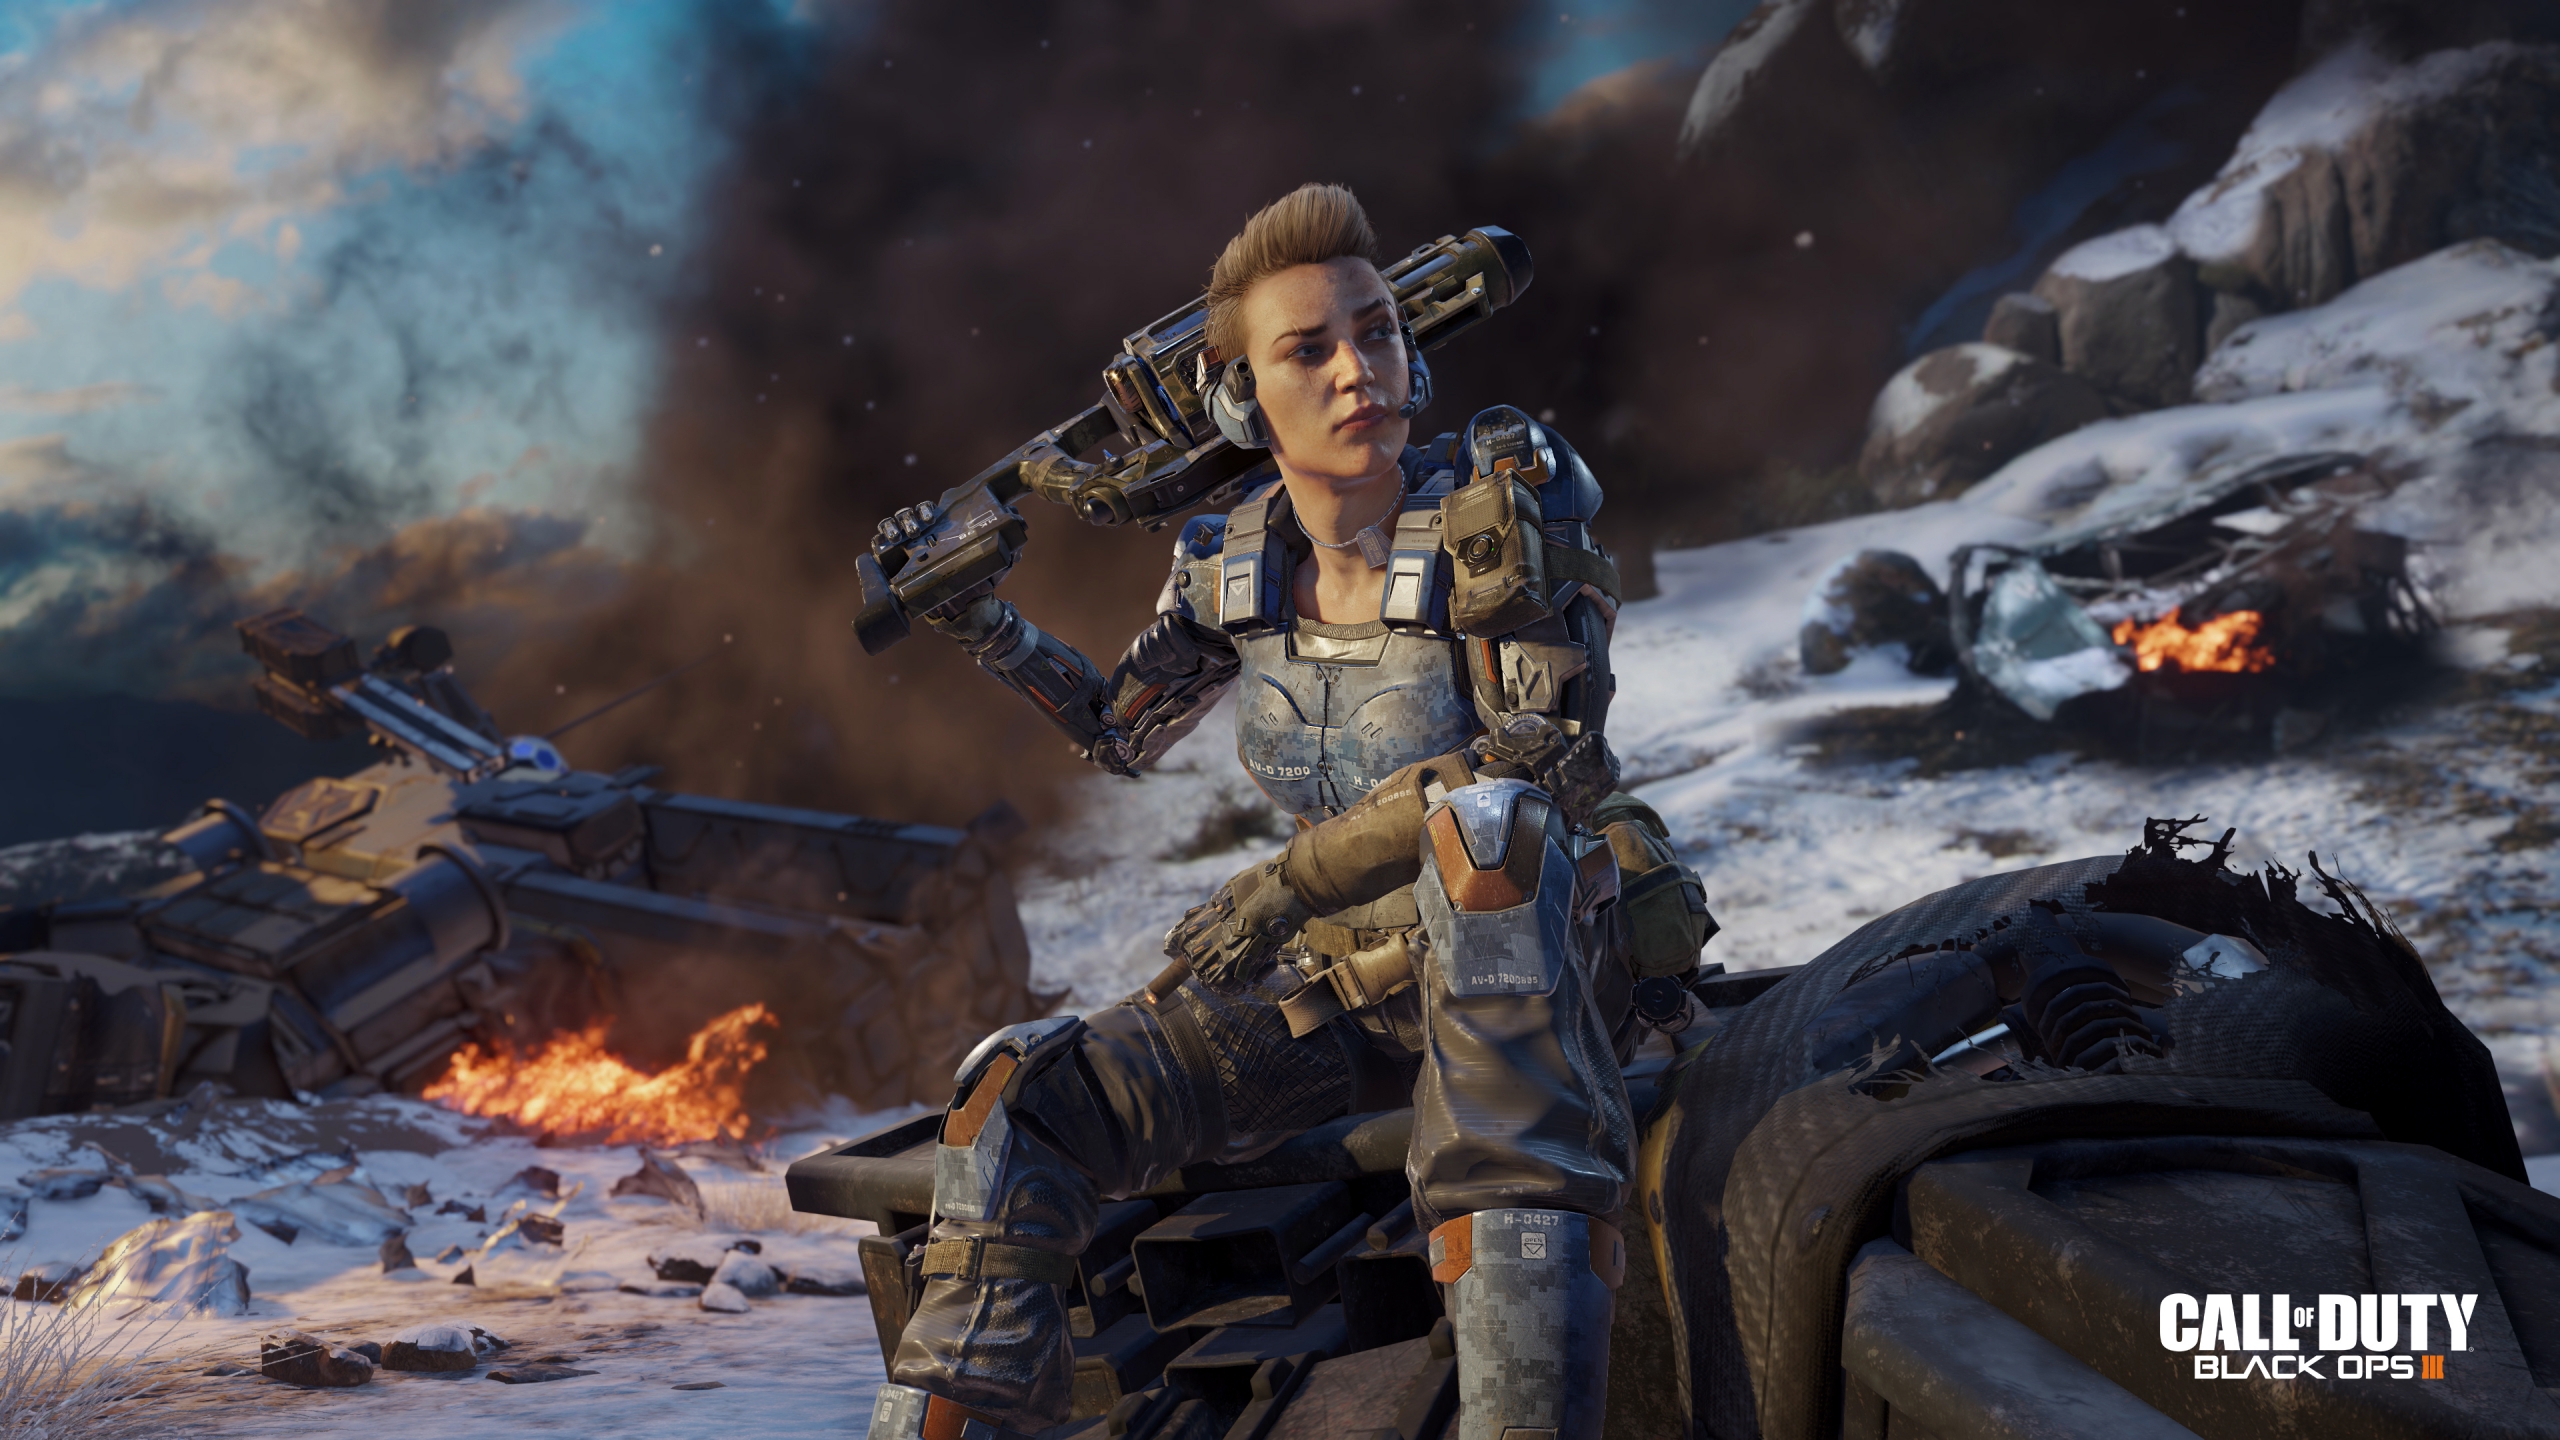 Call of Duty Black Ops 3 Girl for 2560x1440 HDTV resolution